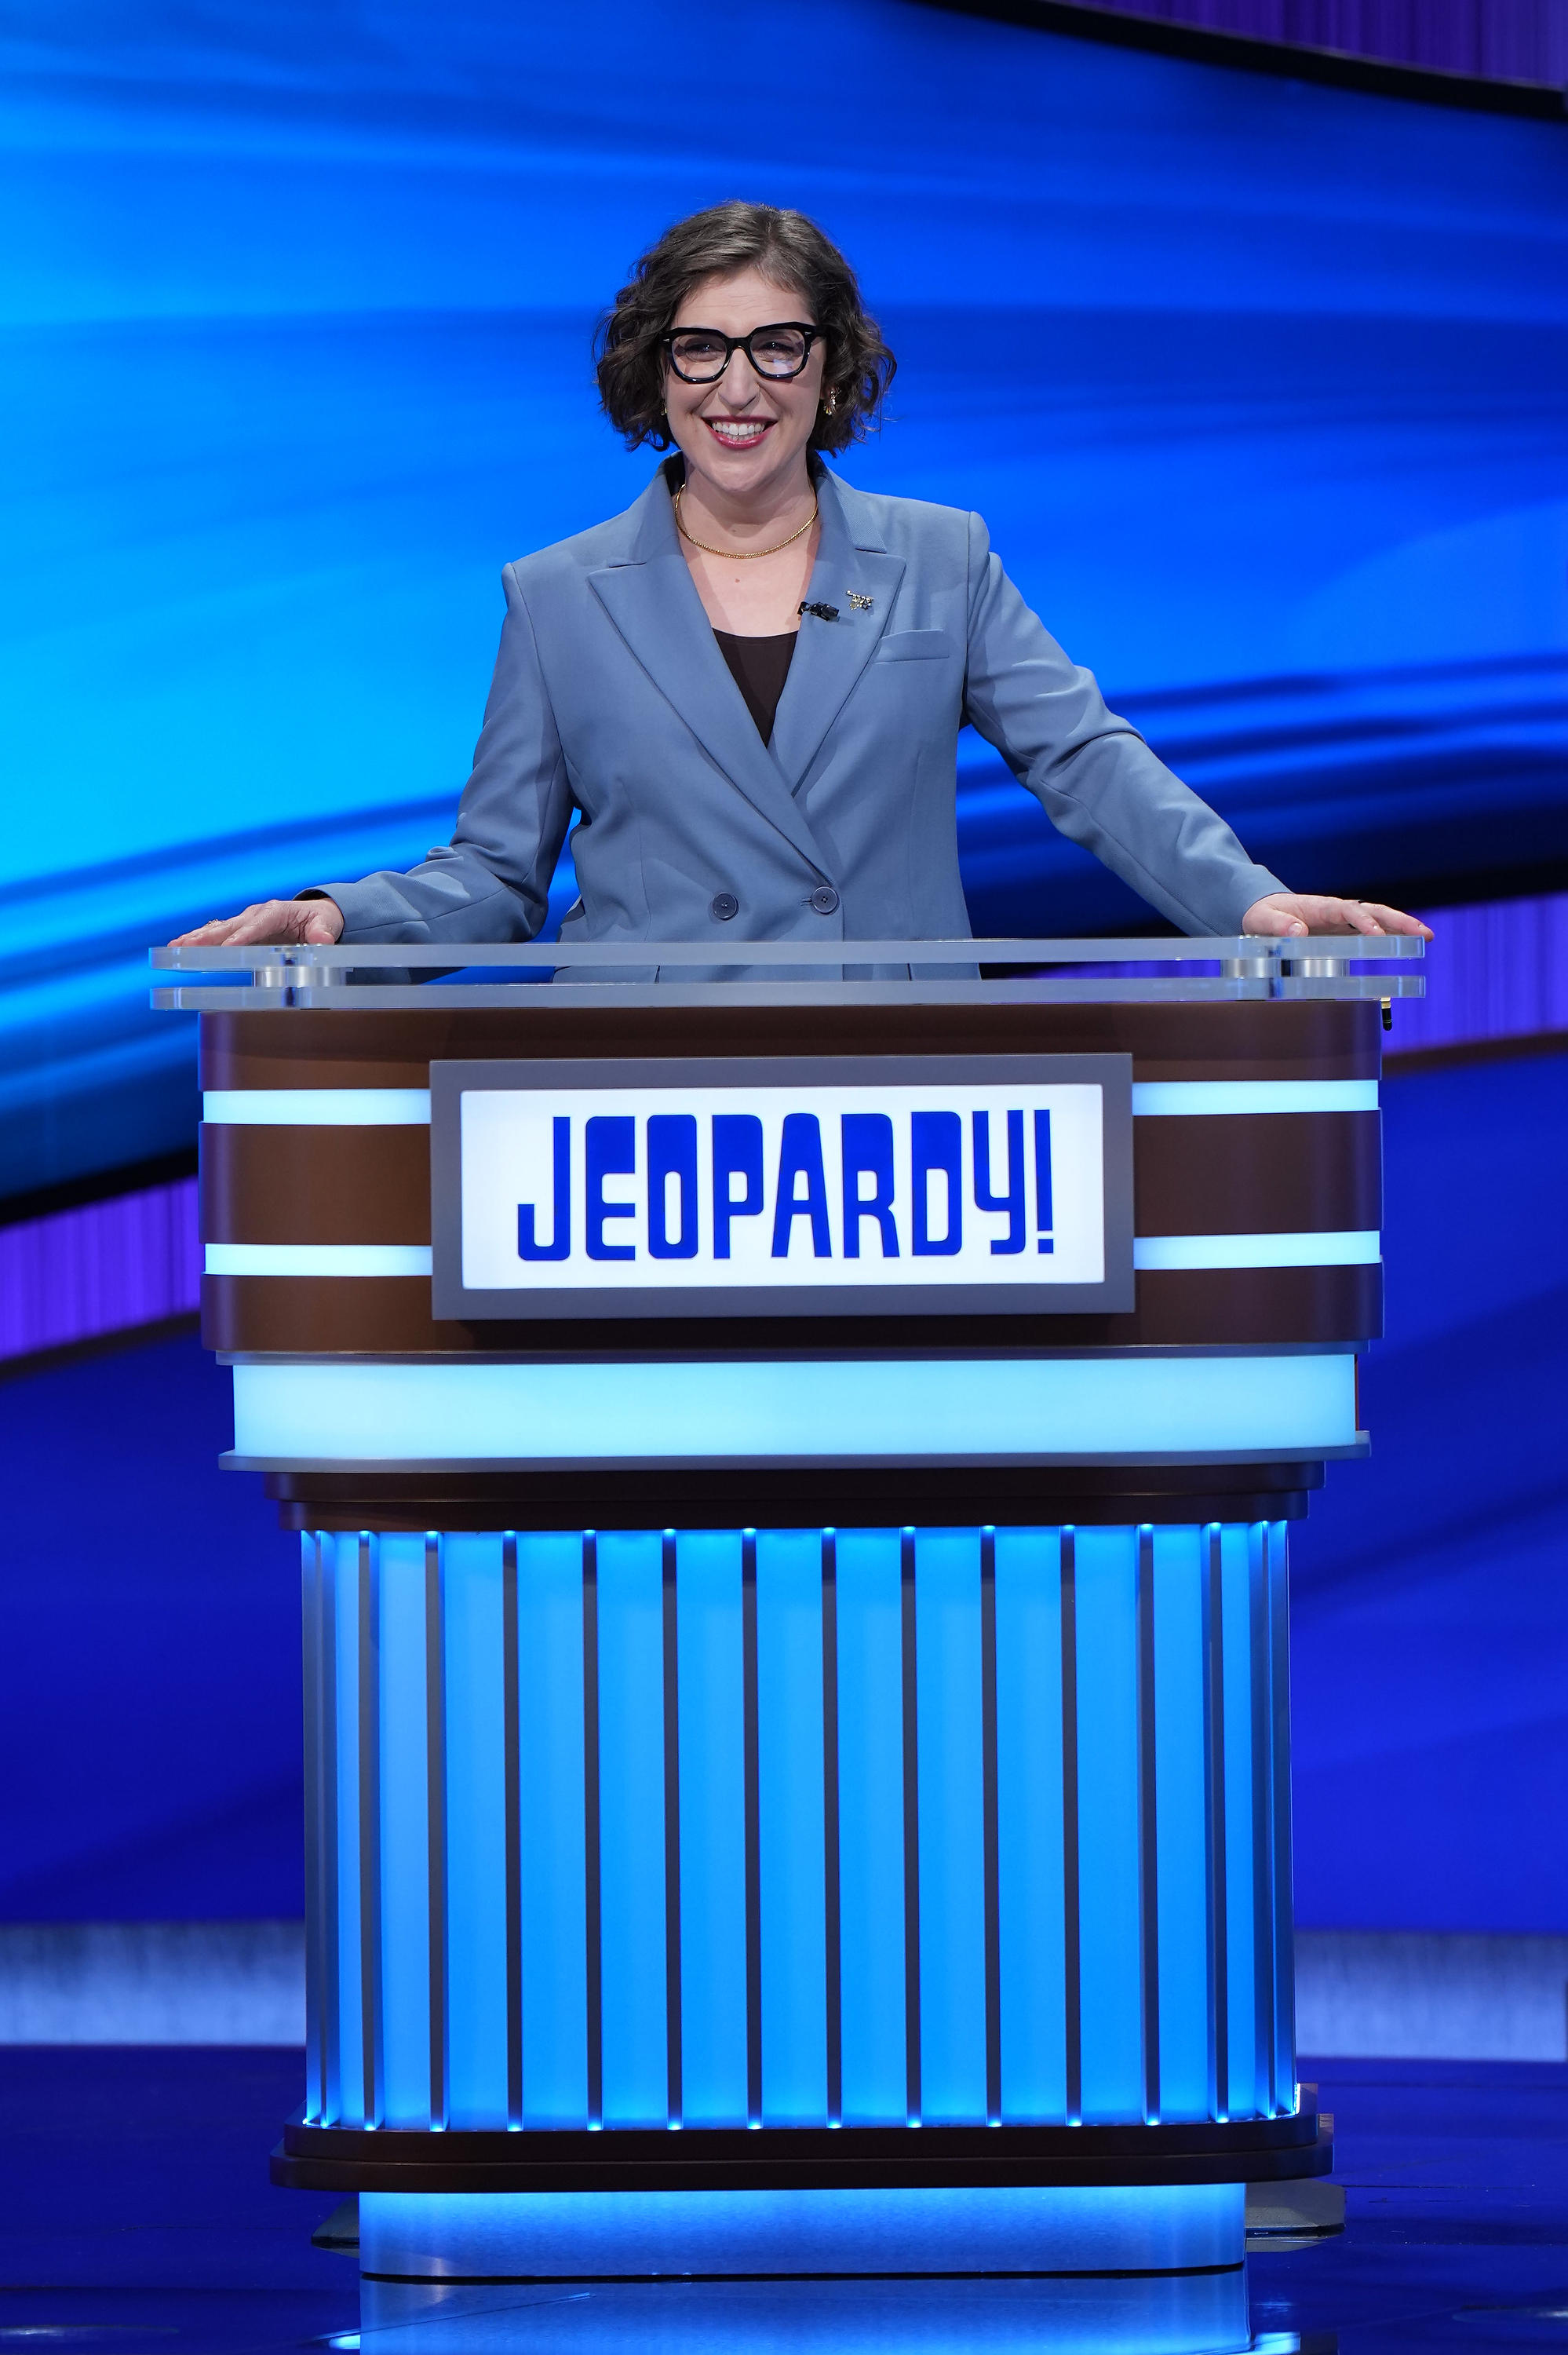 The actress was fired as co-host of Jeopardy! in December